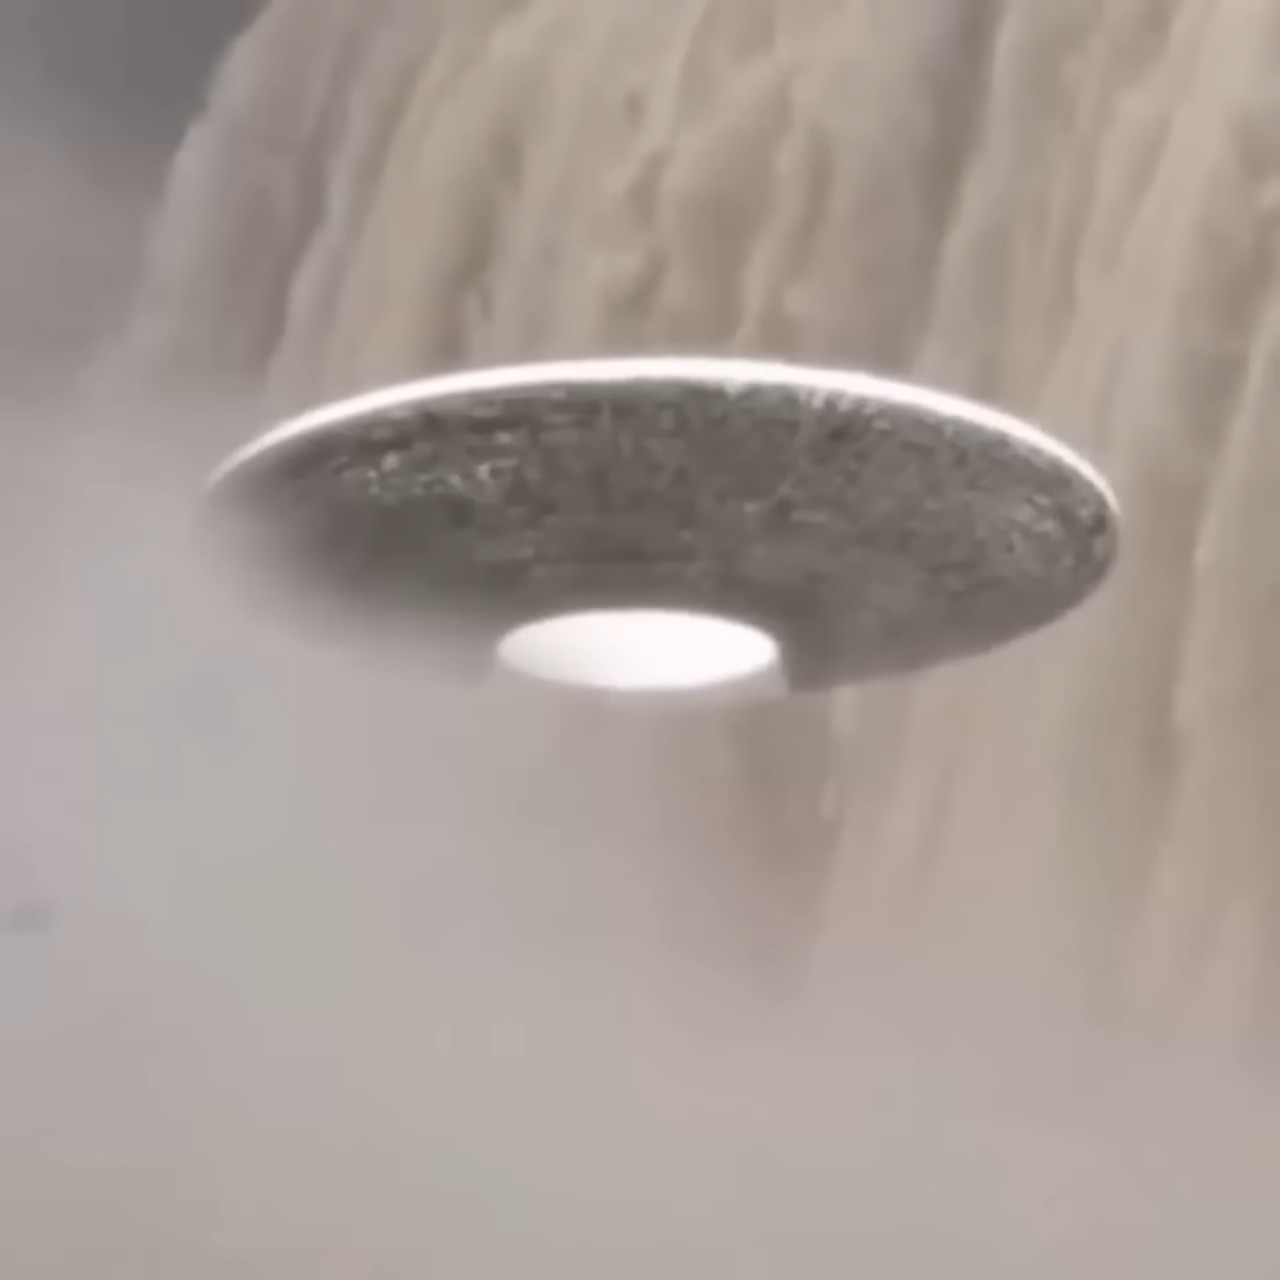 Unraveling the Enigma: Mysterious UFO(OVNI) Emerges from turbulent Waters, Leaving Witnesses Bewildered